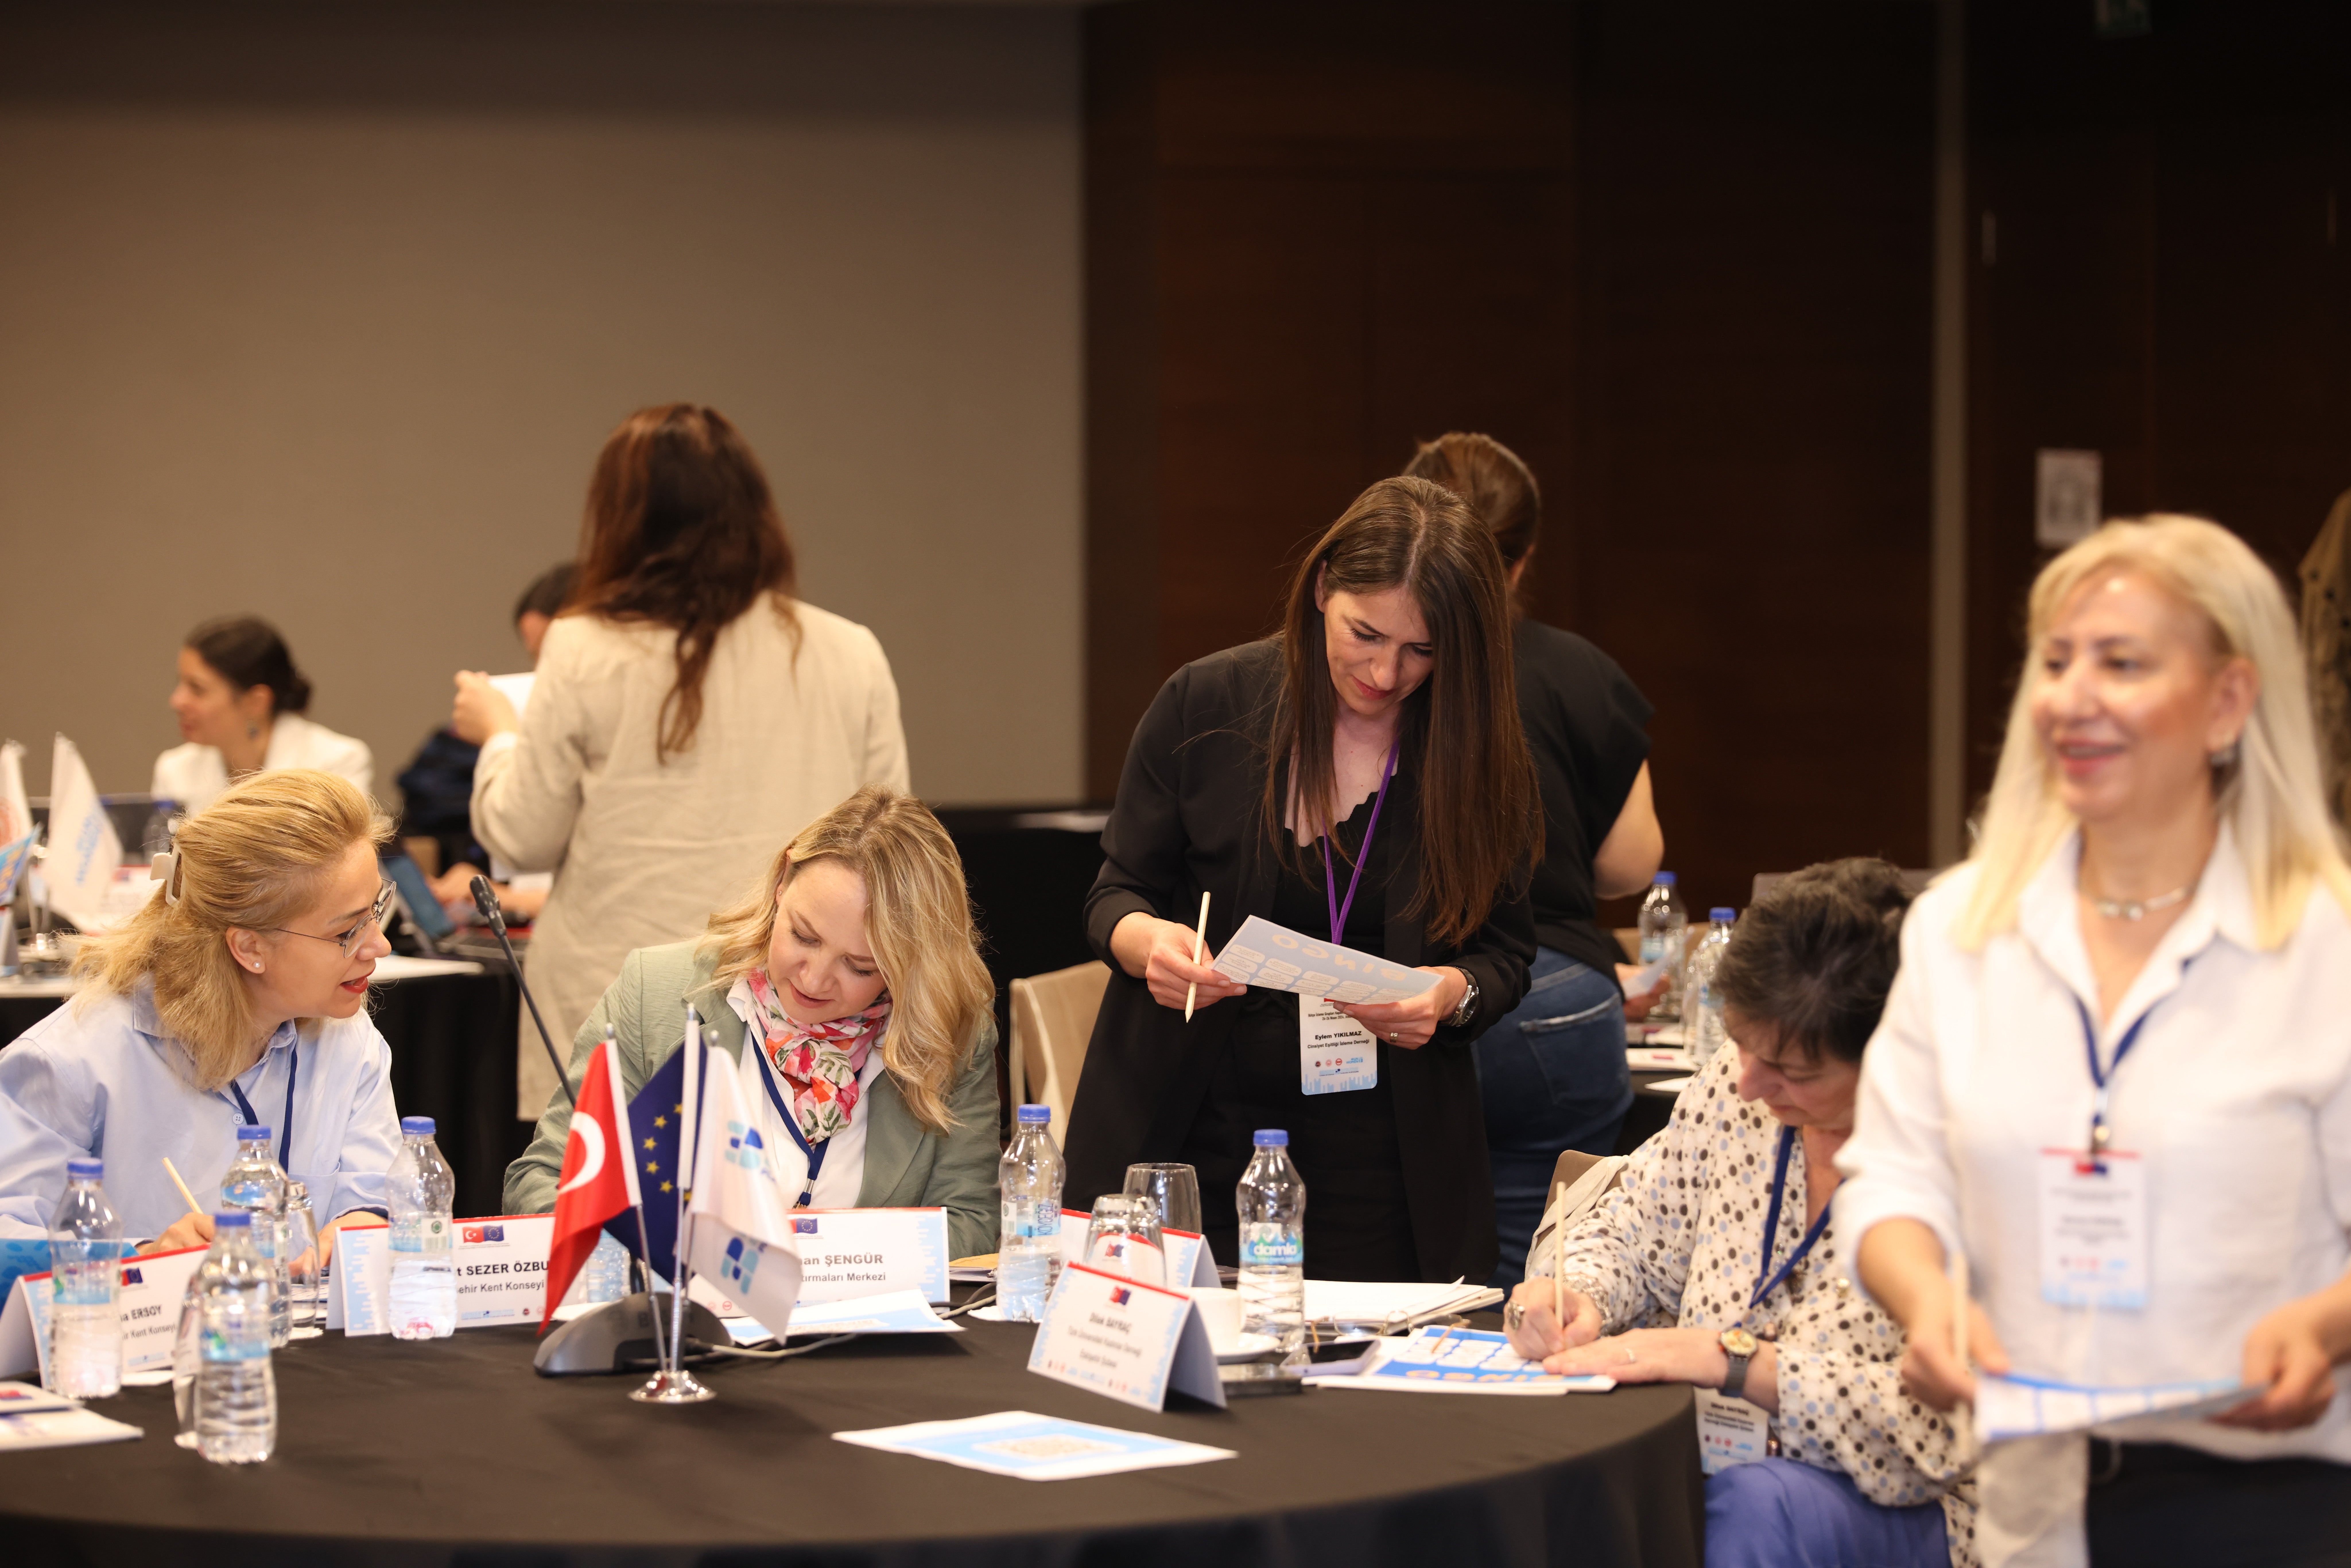 Women's Budgets Groups from across Türkiye meet in Ankara for a capacity building training under the Gender Responsive Planning and Budgeting in Turkey project. Photo: UN Women